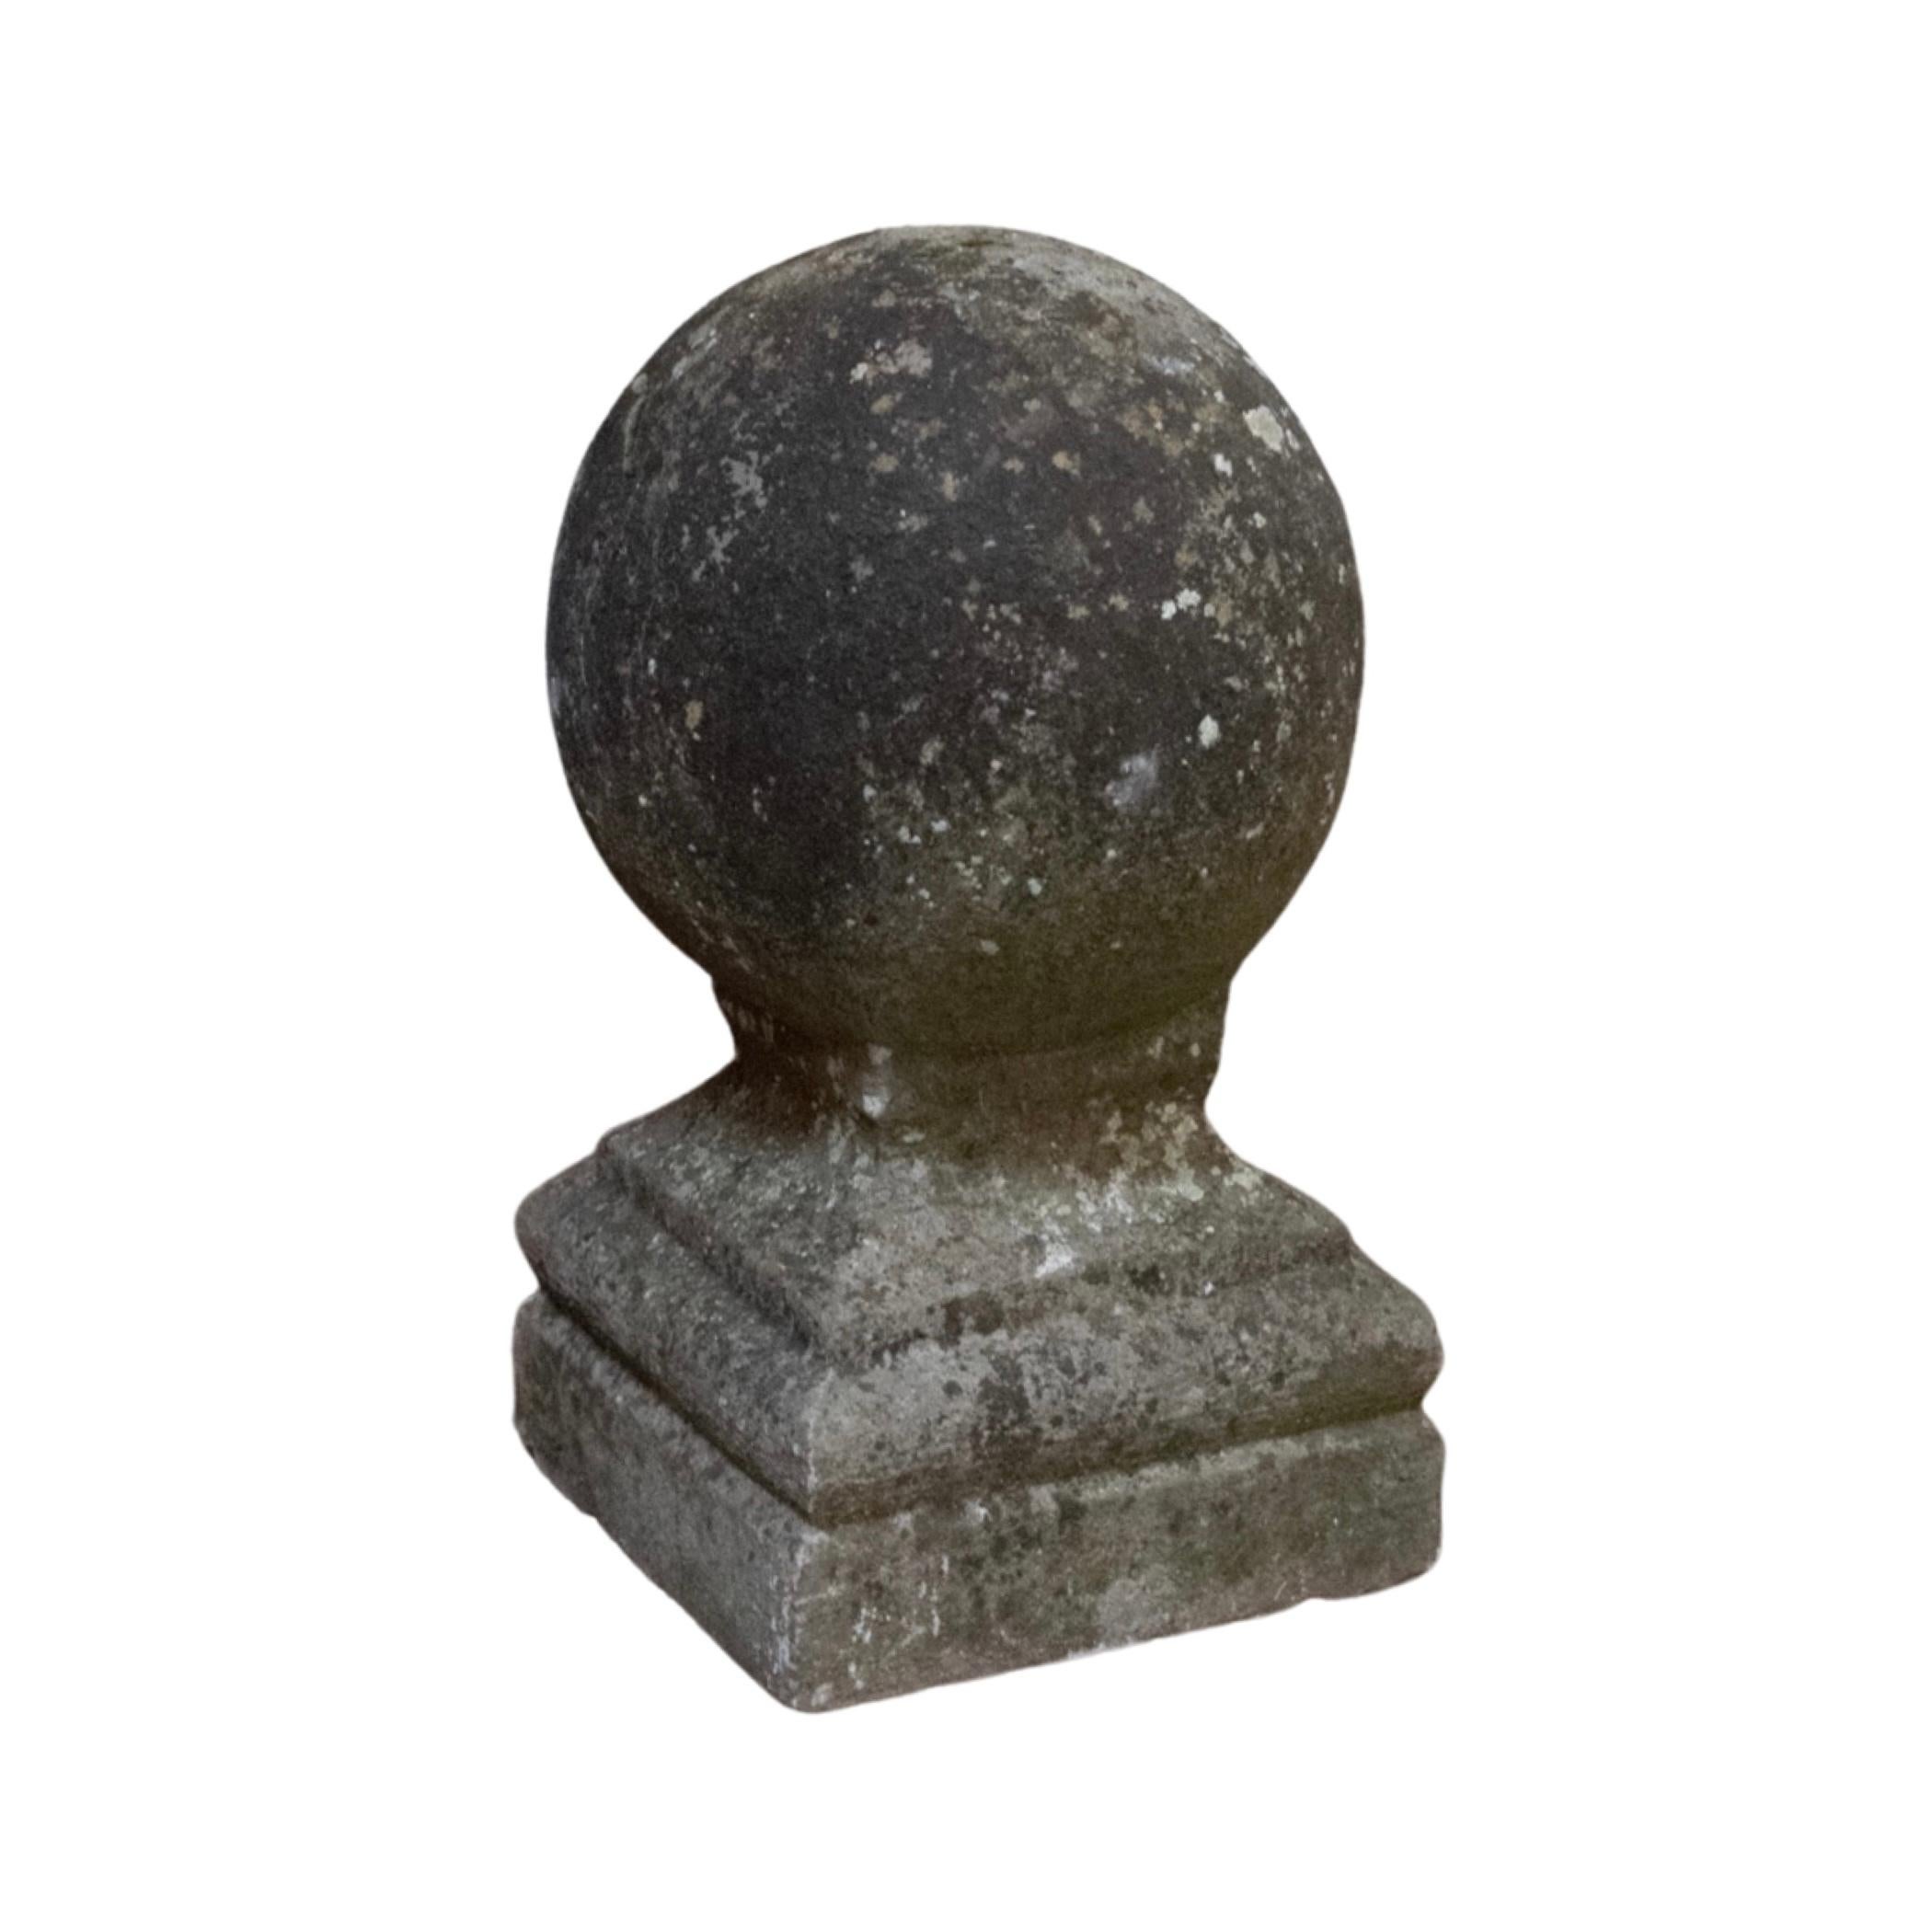 Single finial made of bluestone. Originates from Belgium. Circa, 17th century. 

 

Sold as a single individual finial. Can also be sold as a complete set of 10 finials for $16,800.